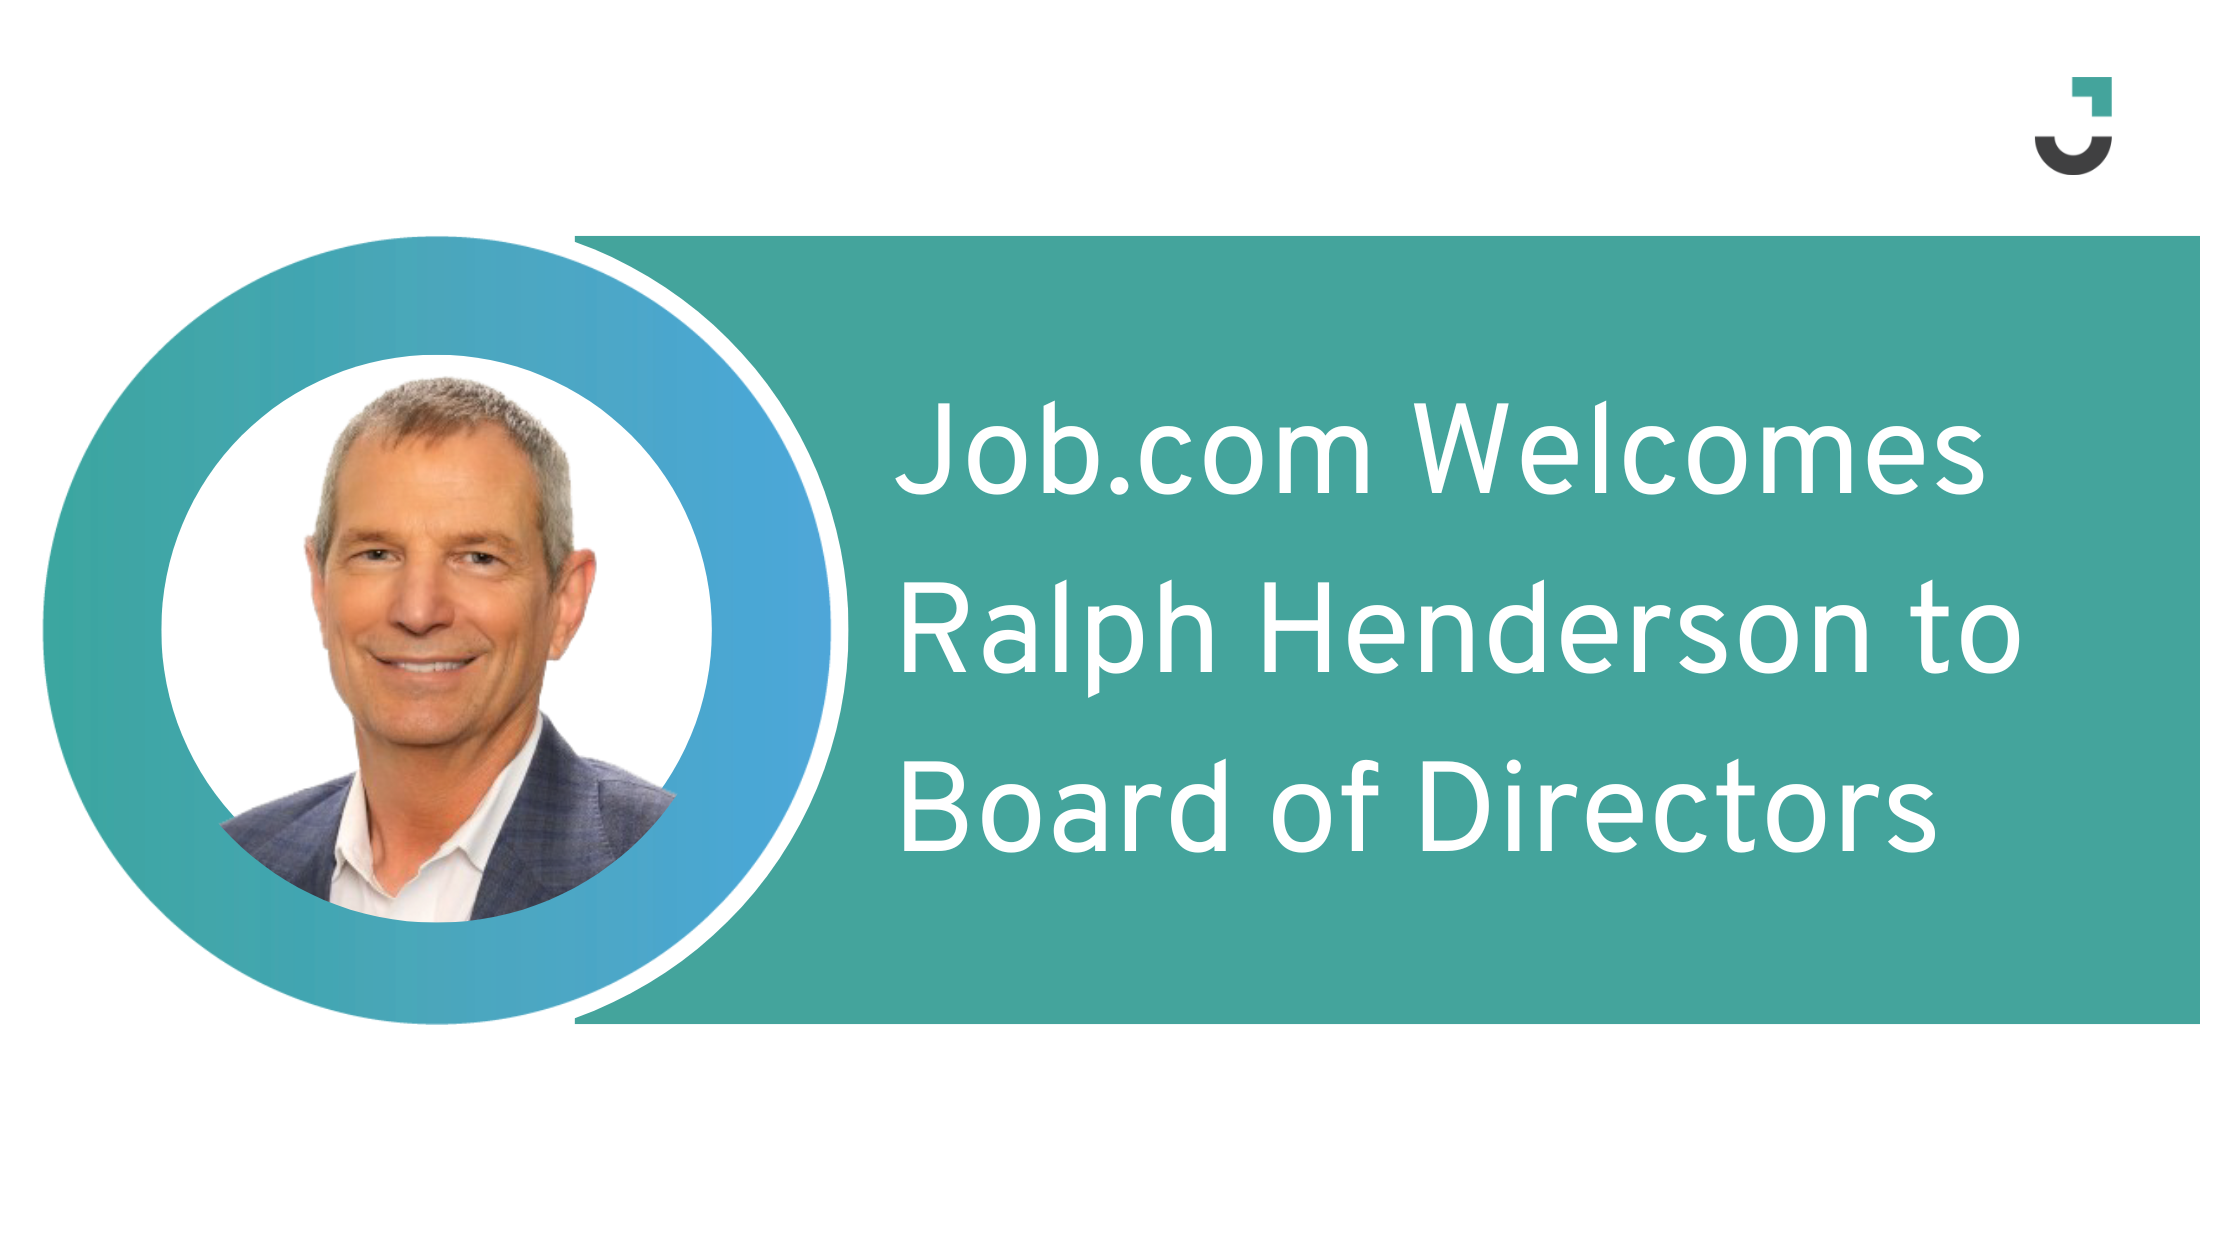 Job.com Welcomes Recruitment Industry Leader Ralph Henderson to Board of Directors